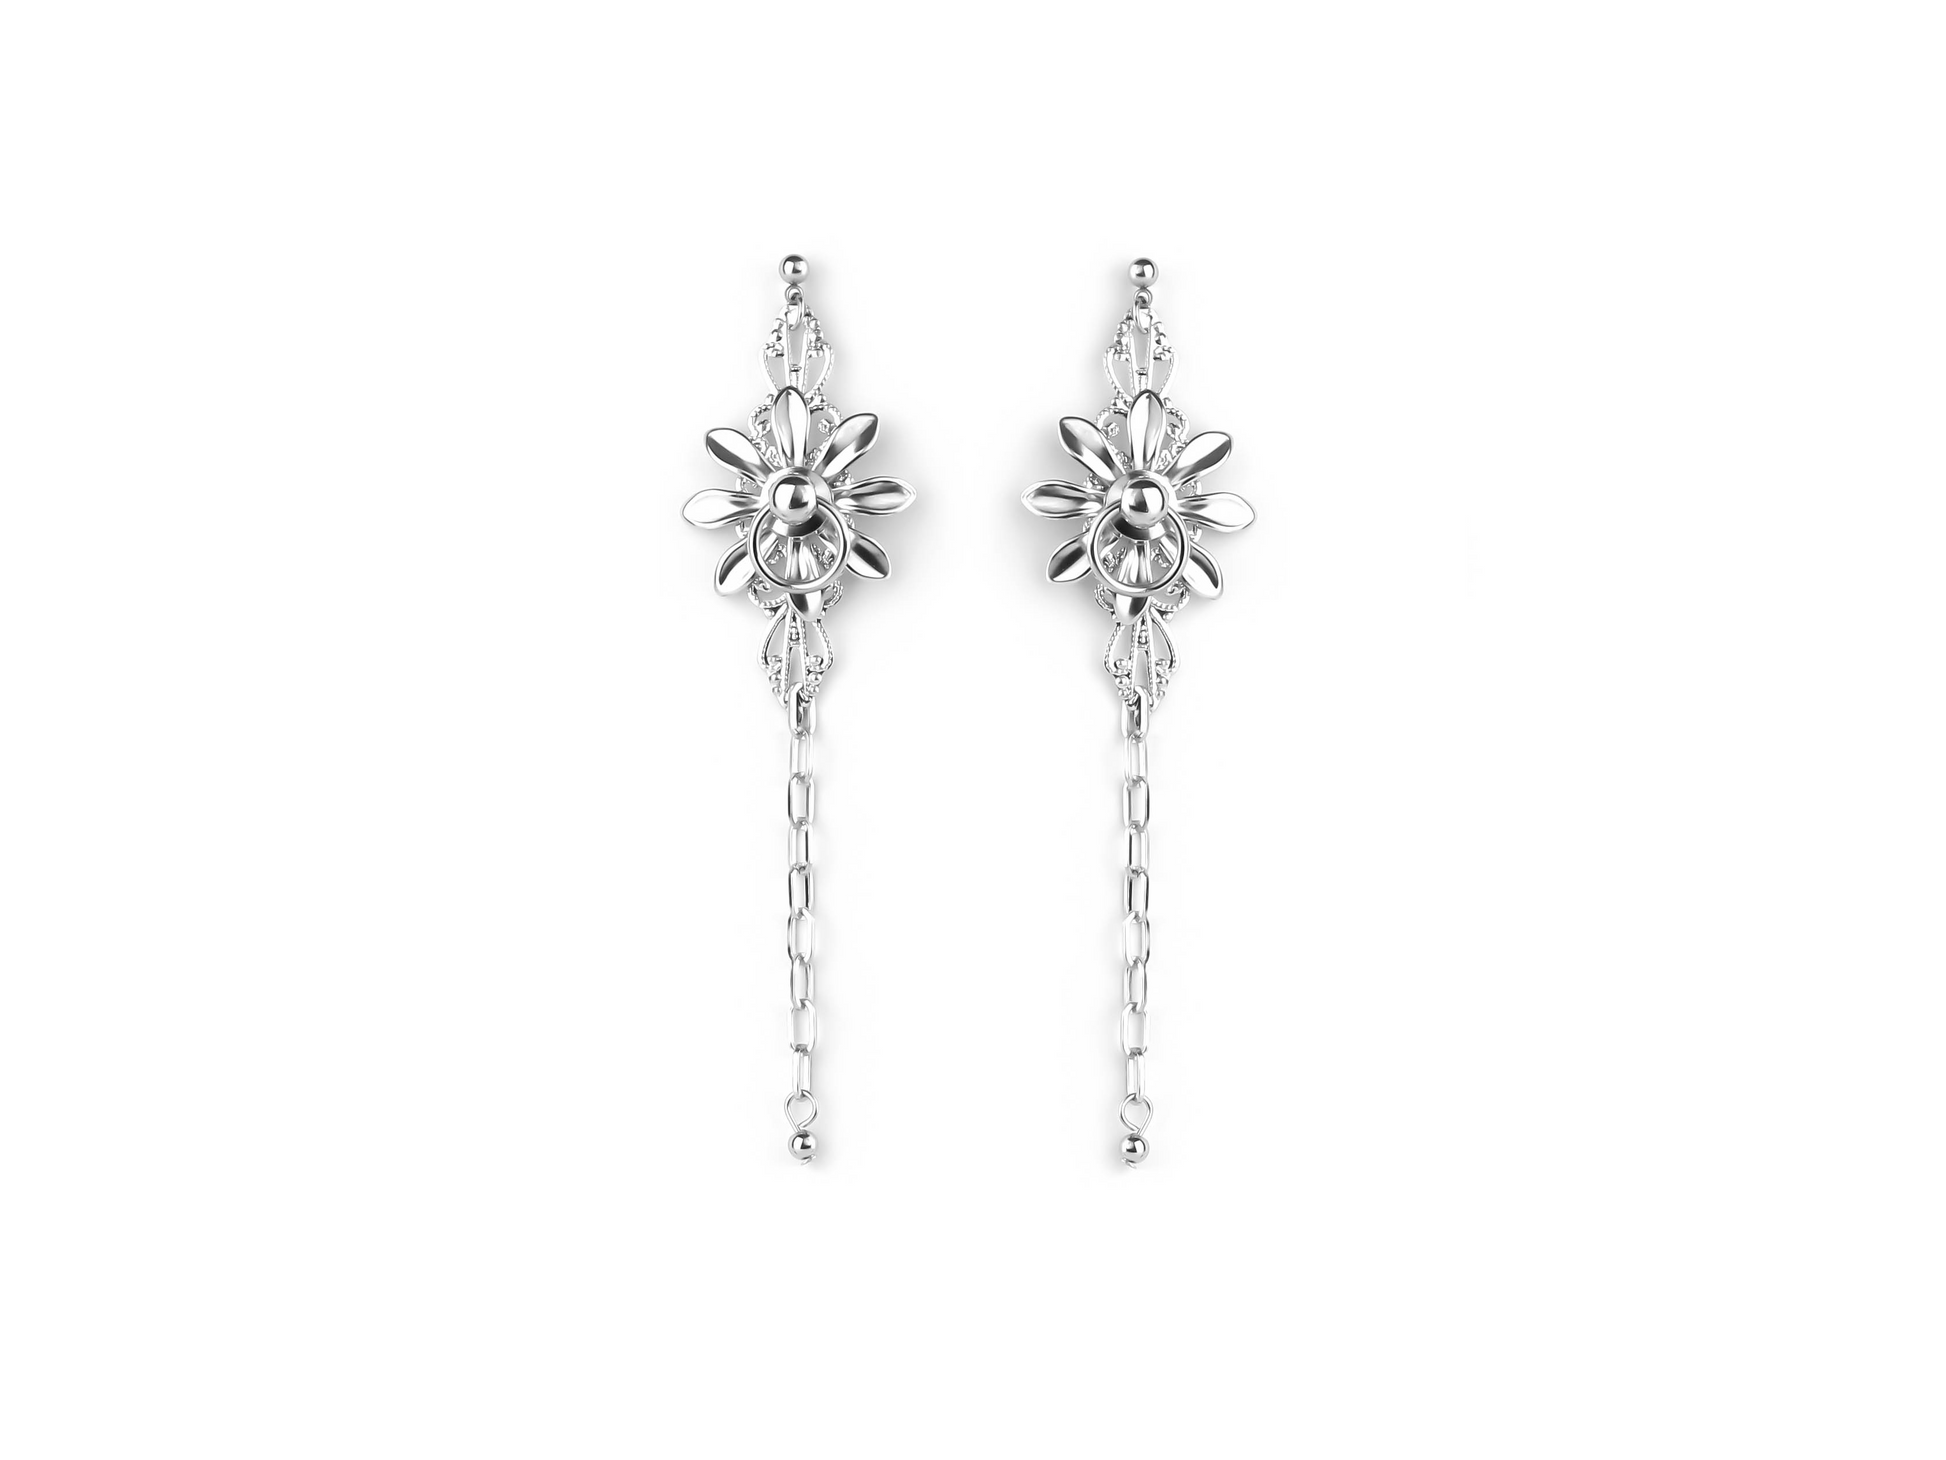 Neo-gothic Myril Jewels earrings, featuring a floral motif and delicate hanging chains, perfect for adding a dark-avantgarde touch to gothic-chic ensembles.